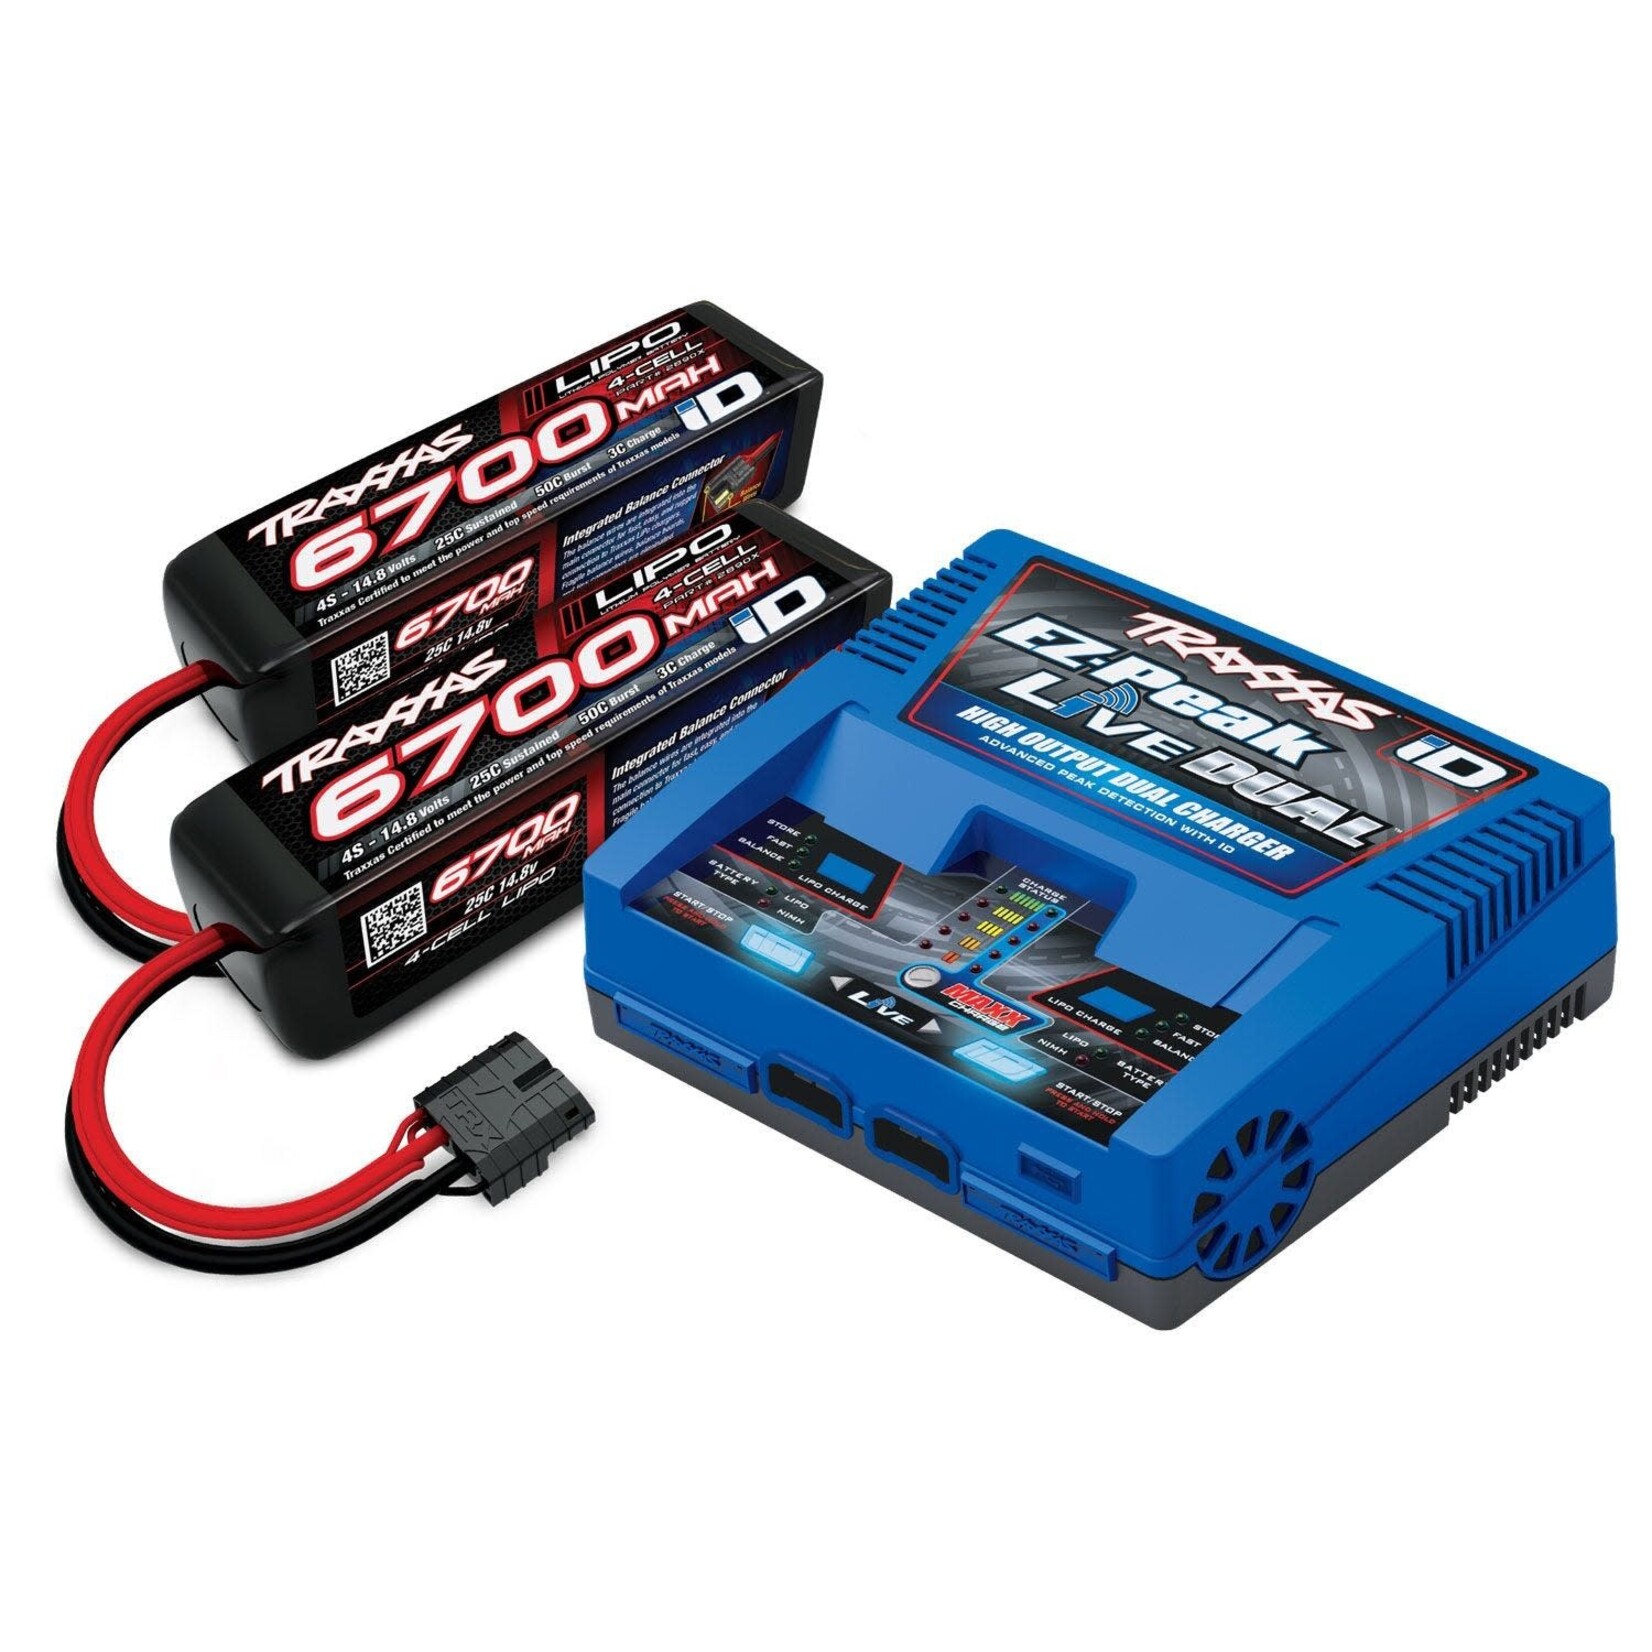 Traxxas 6700Mah 4S Battery (2) with EZ-Peak Live Dual Charger Completer Pack